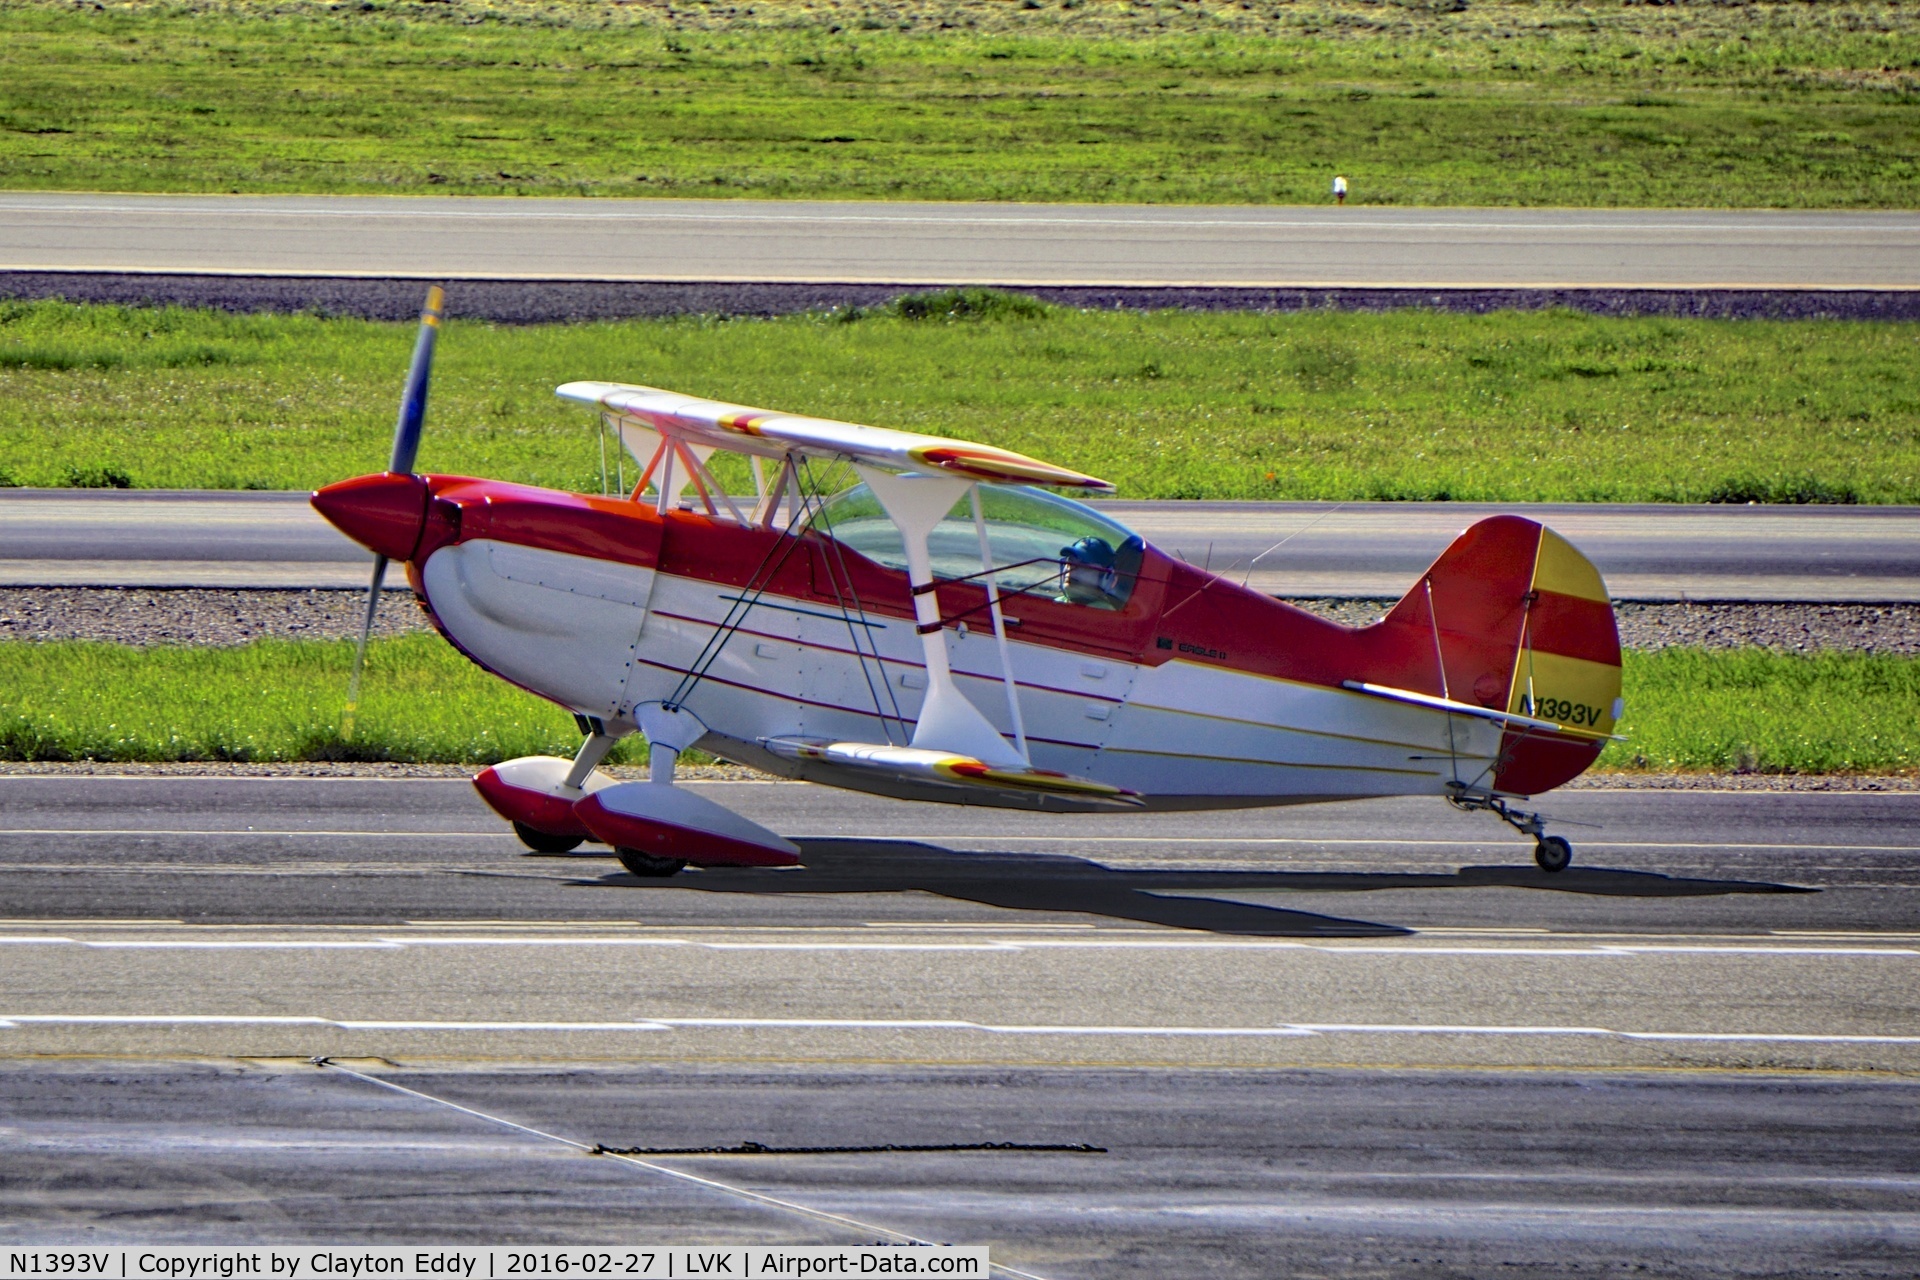 N1393V, 1984 Christen Eagle II C/N HAY 0001, Livermore Airport 2016